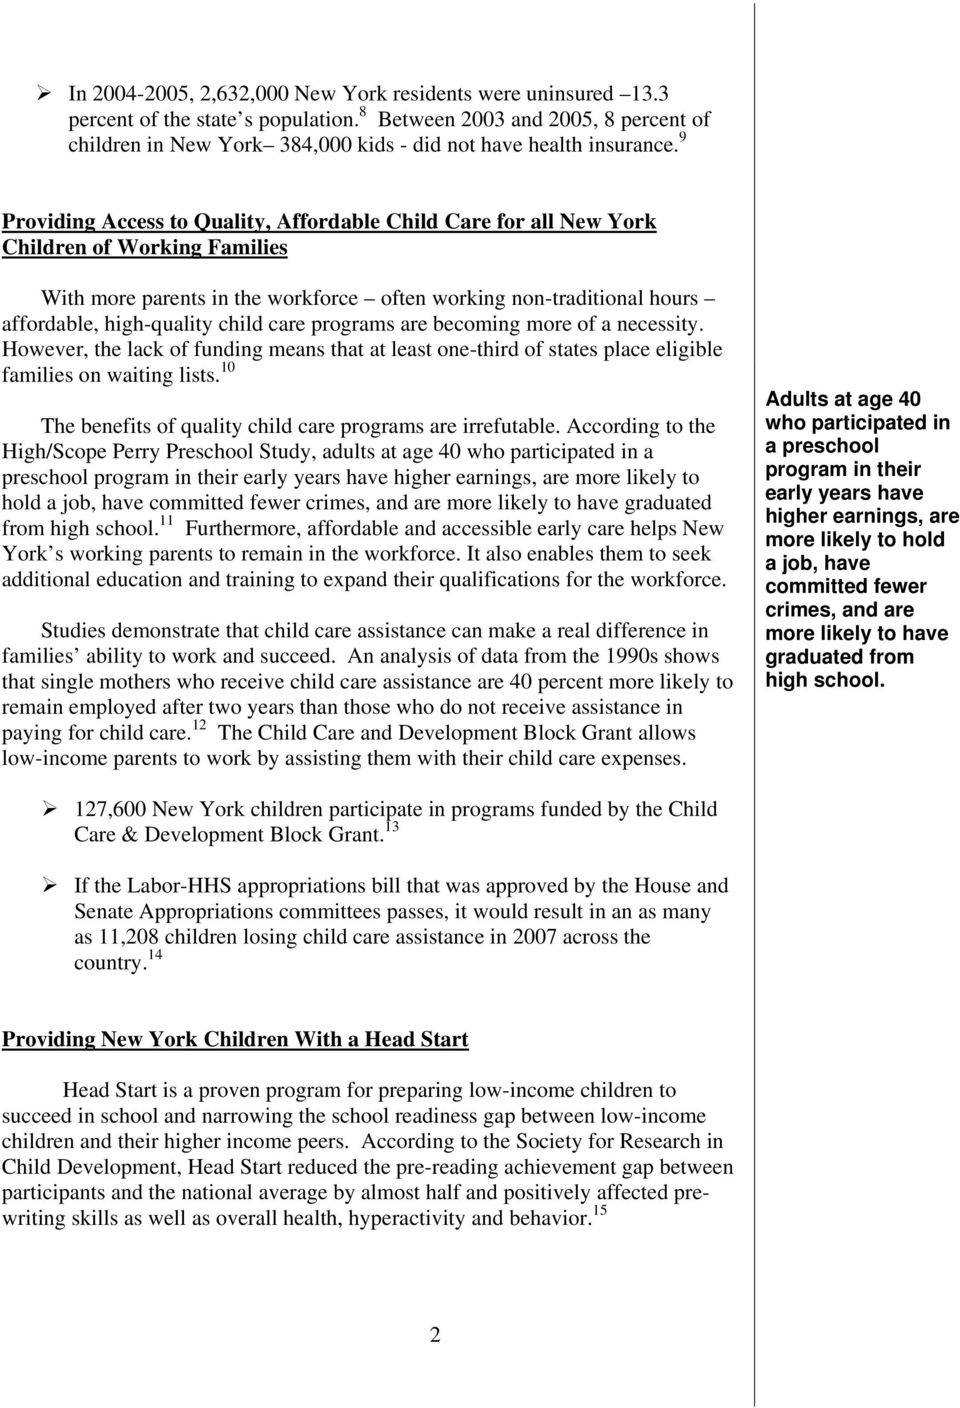 9 Providing Access to Quality, Affordable Child Care for all New York Children of Working Families With more parents in the workforce often working non-traditional hours affordable, high-quality